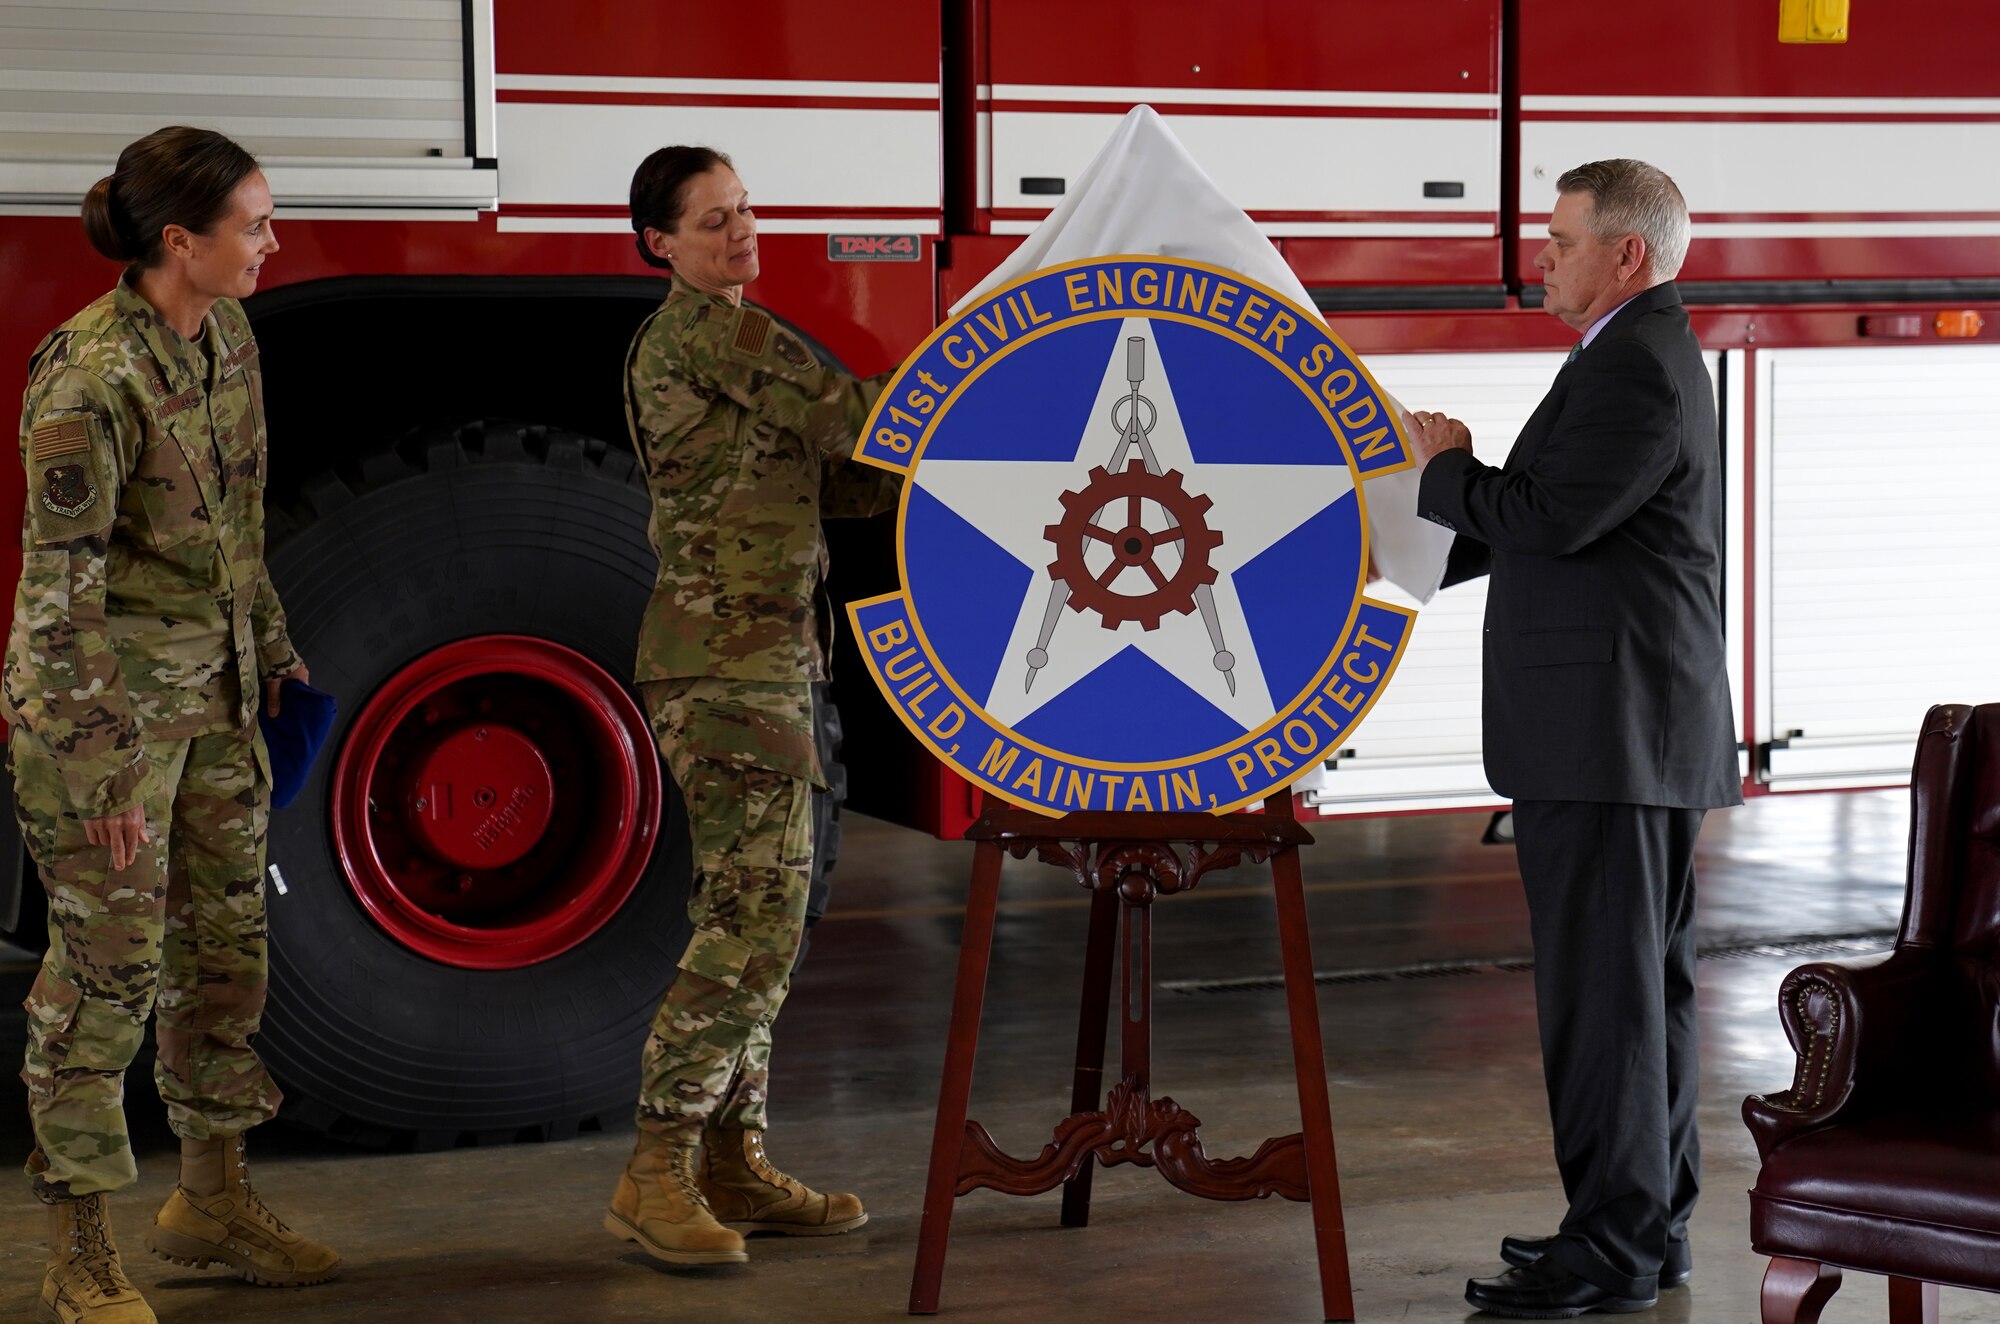 U.S. Air Force Col. Heather Blackwell, 81st Training Wing commander, Col. Marcia Quigley, 81st Mission Support Group commander, and Robert Moseley, 81st Civil Engineering Squadron director, unveil the 81st CES logo during the 81st CES reactivation ceremony inside the Keesler Fire Department at Keesler Air Force Base, Mississippi, Feb. 18, 2020. The 81st CES reactivation links contractors and military members from base operations support and the 81st Infrastructure Division with a proper chain of command. (U.S Air Force photo by Airman 1st Class Kimberly Mueller)